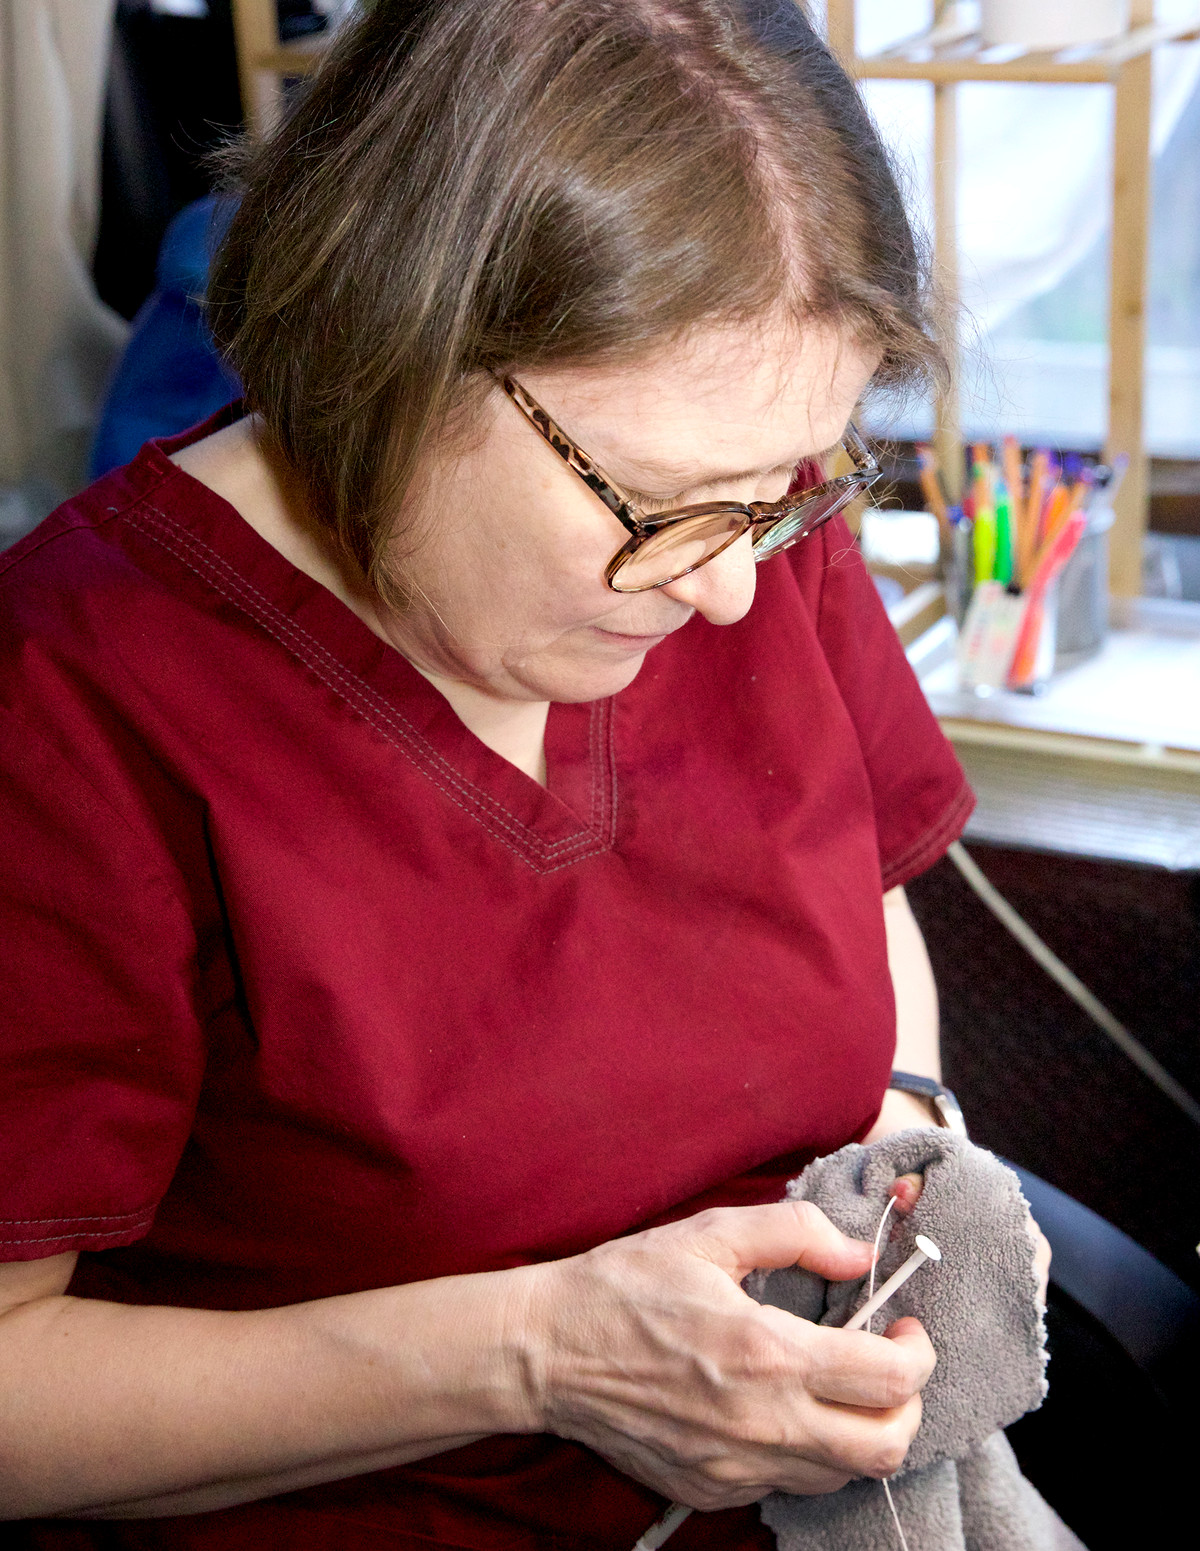 A woman with short brown hair and a red shirt holds a tiny baby opossum in a soft cloth while hand-feeding it through a tube.